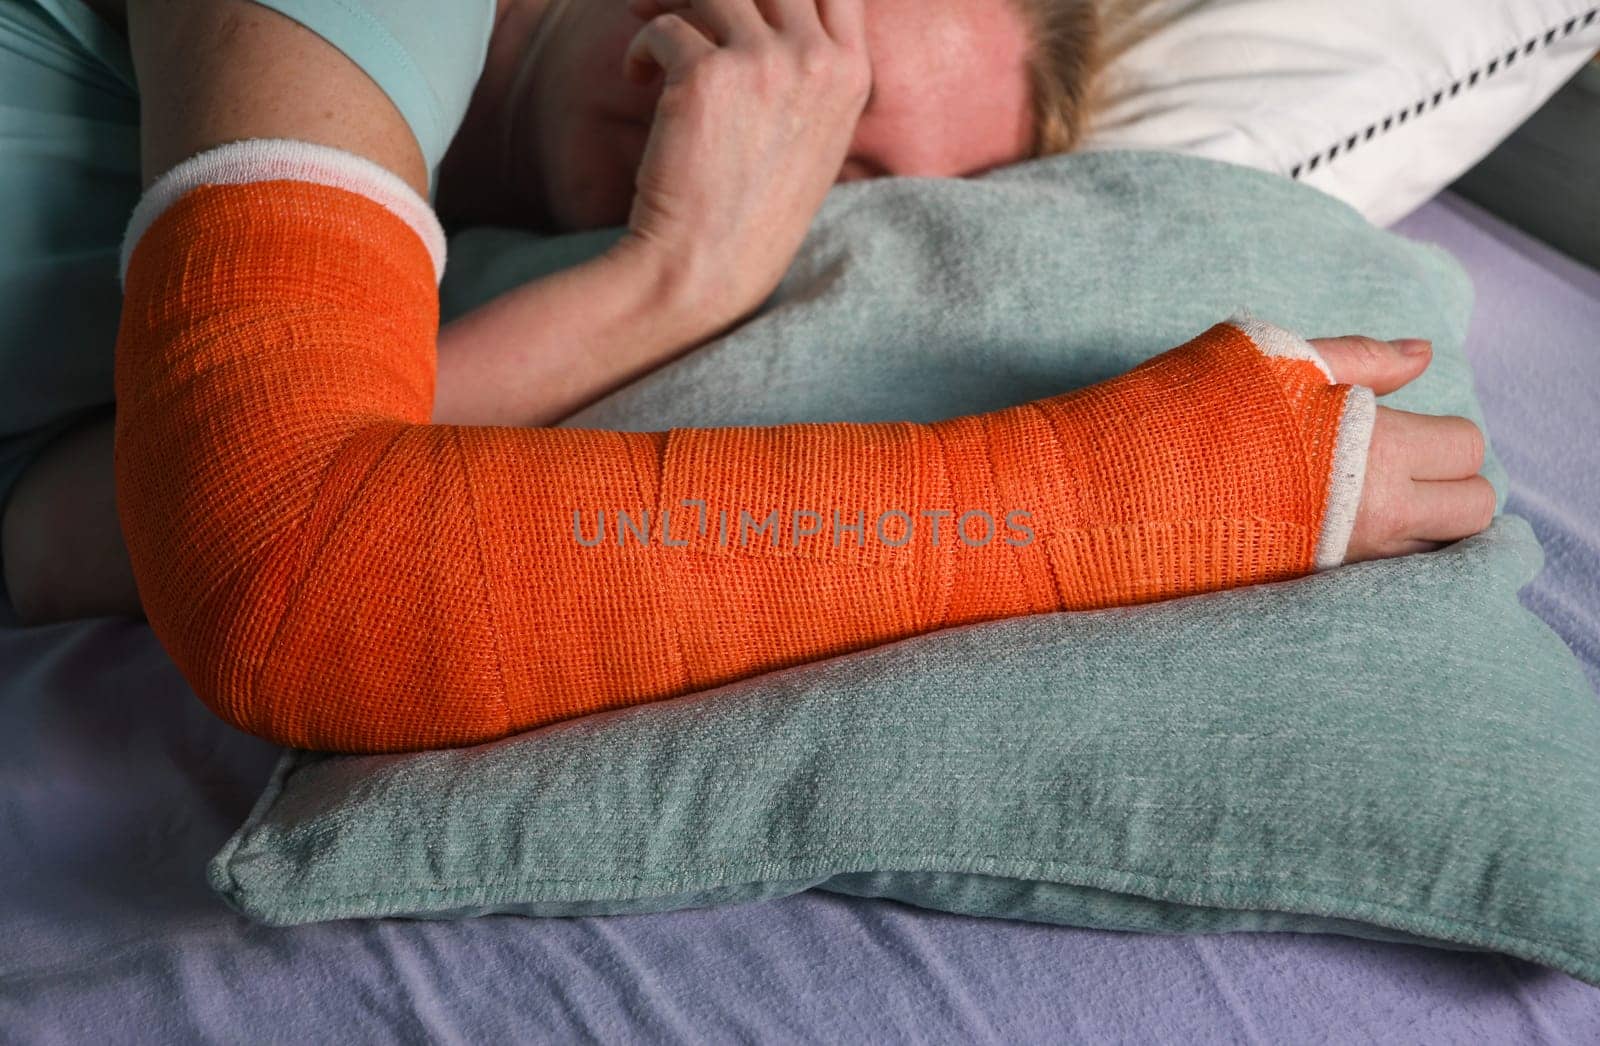 woman with a broken right arm with an orange fiberglass plaster cast sleeps in bed with a pillow under the cast by KaterinaDalemans